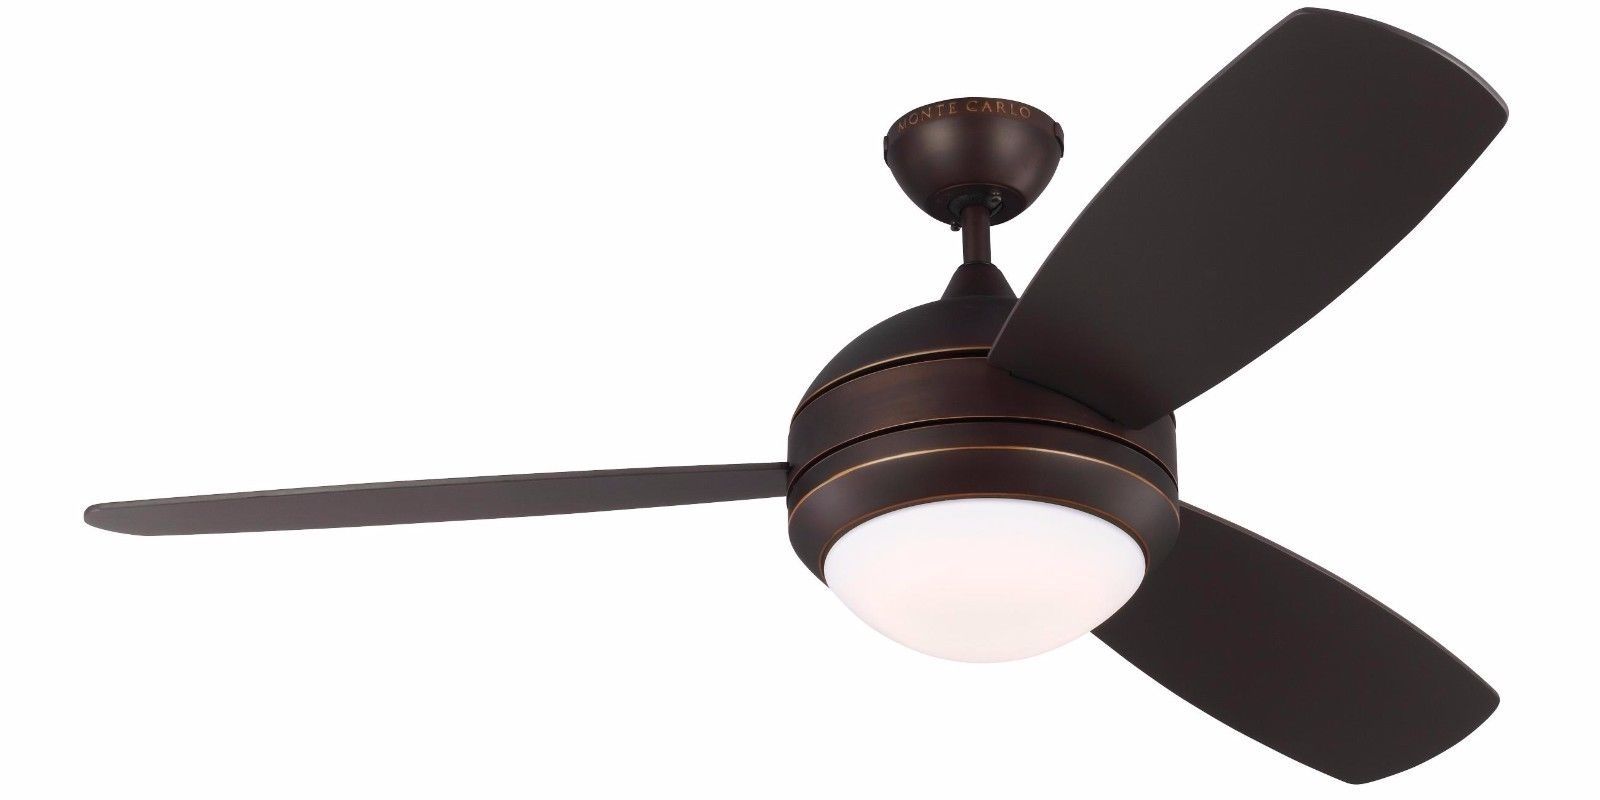 Monte Carlo Discus Trio 3dir52 Indoor/outdoor Ceiling Fan | Ebay In Outdoor Ceiling Fans With Lights At Ebay (View 15 of 15)